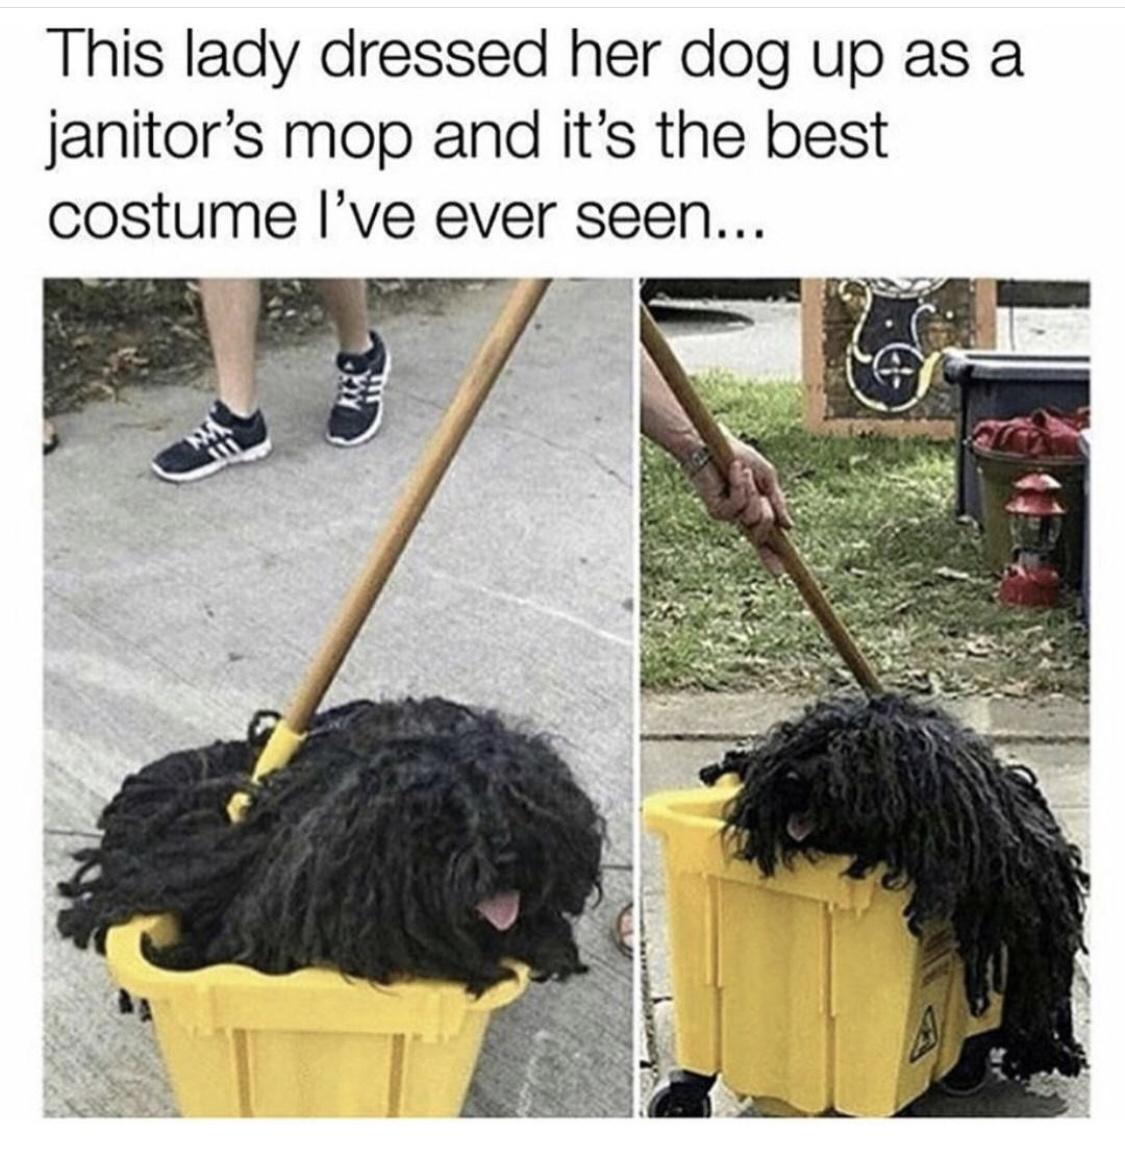 funny memes and pics - dog halloween costumes - This lady dressed her dog up as a janitor's mop and it's the best costume I've ever seen...